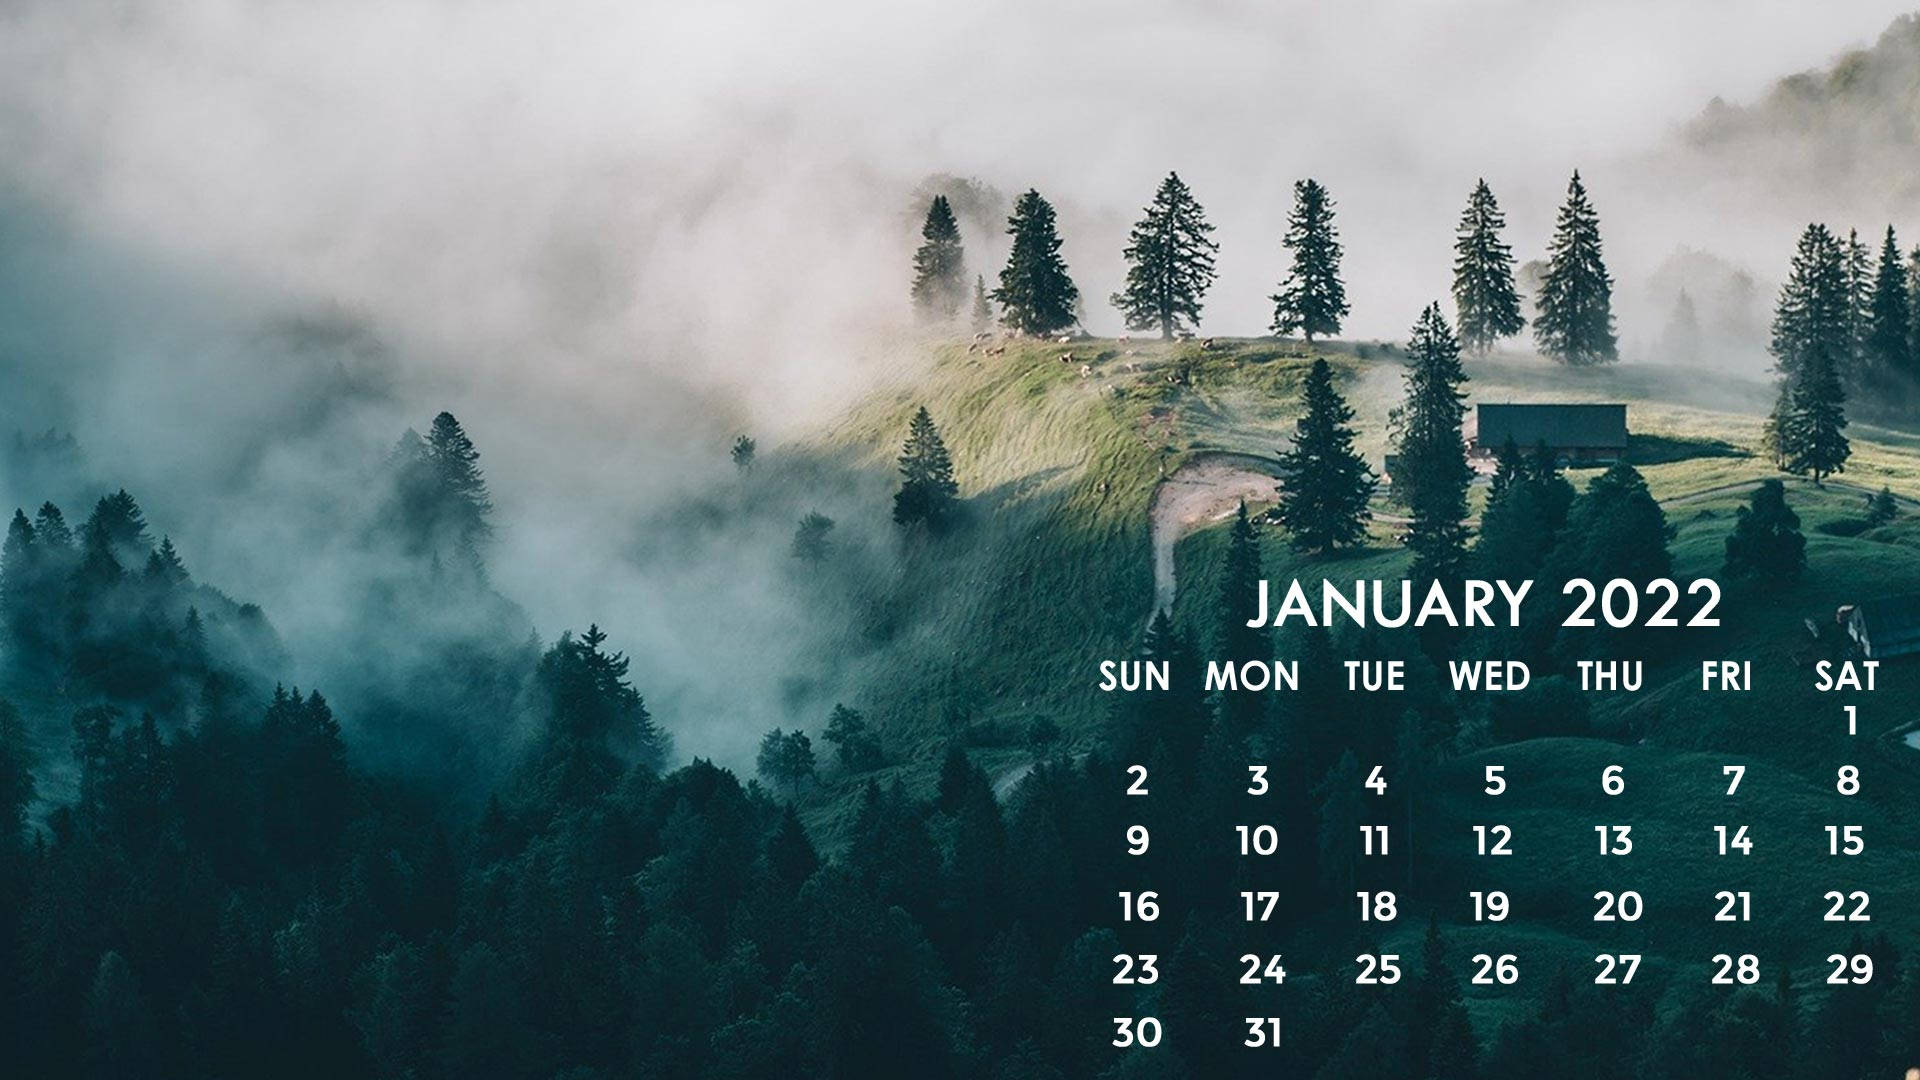 Foggy Mountain Top January 2022 Calendar Picture